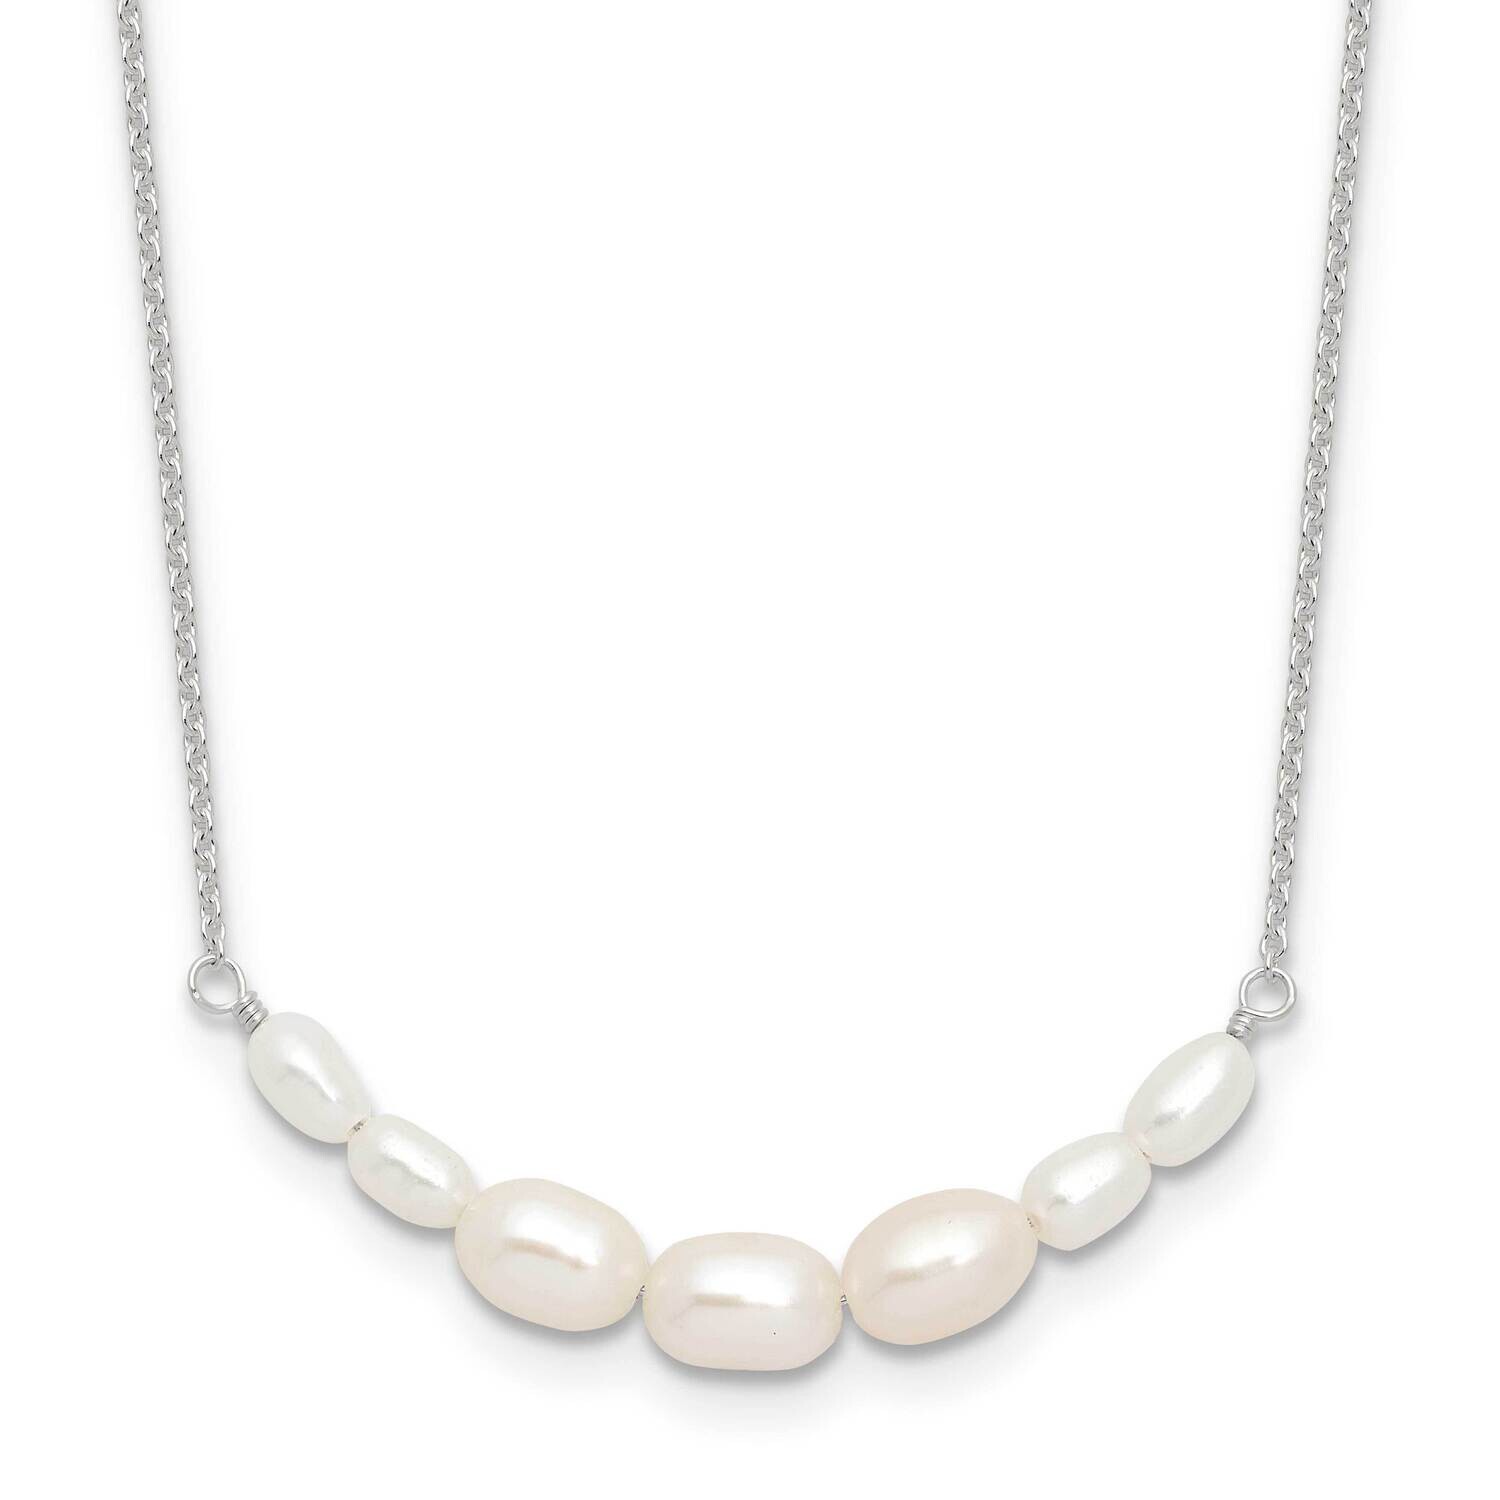 E-Coated Freshwater Cultured Pearl 18 Inch 2 Inch Extension Necklace Sterling Silver QH5807-18